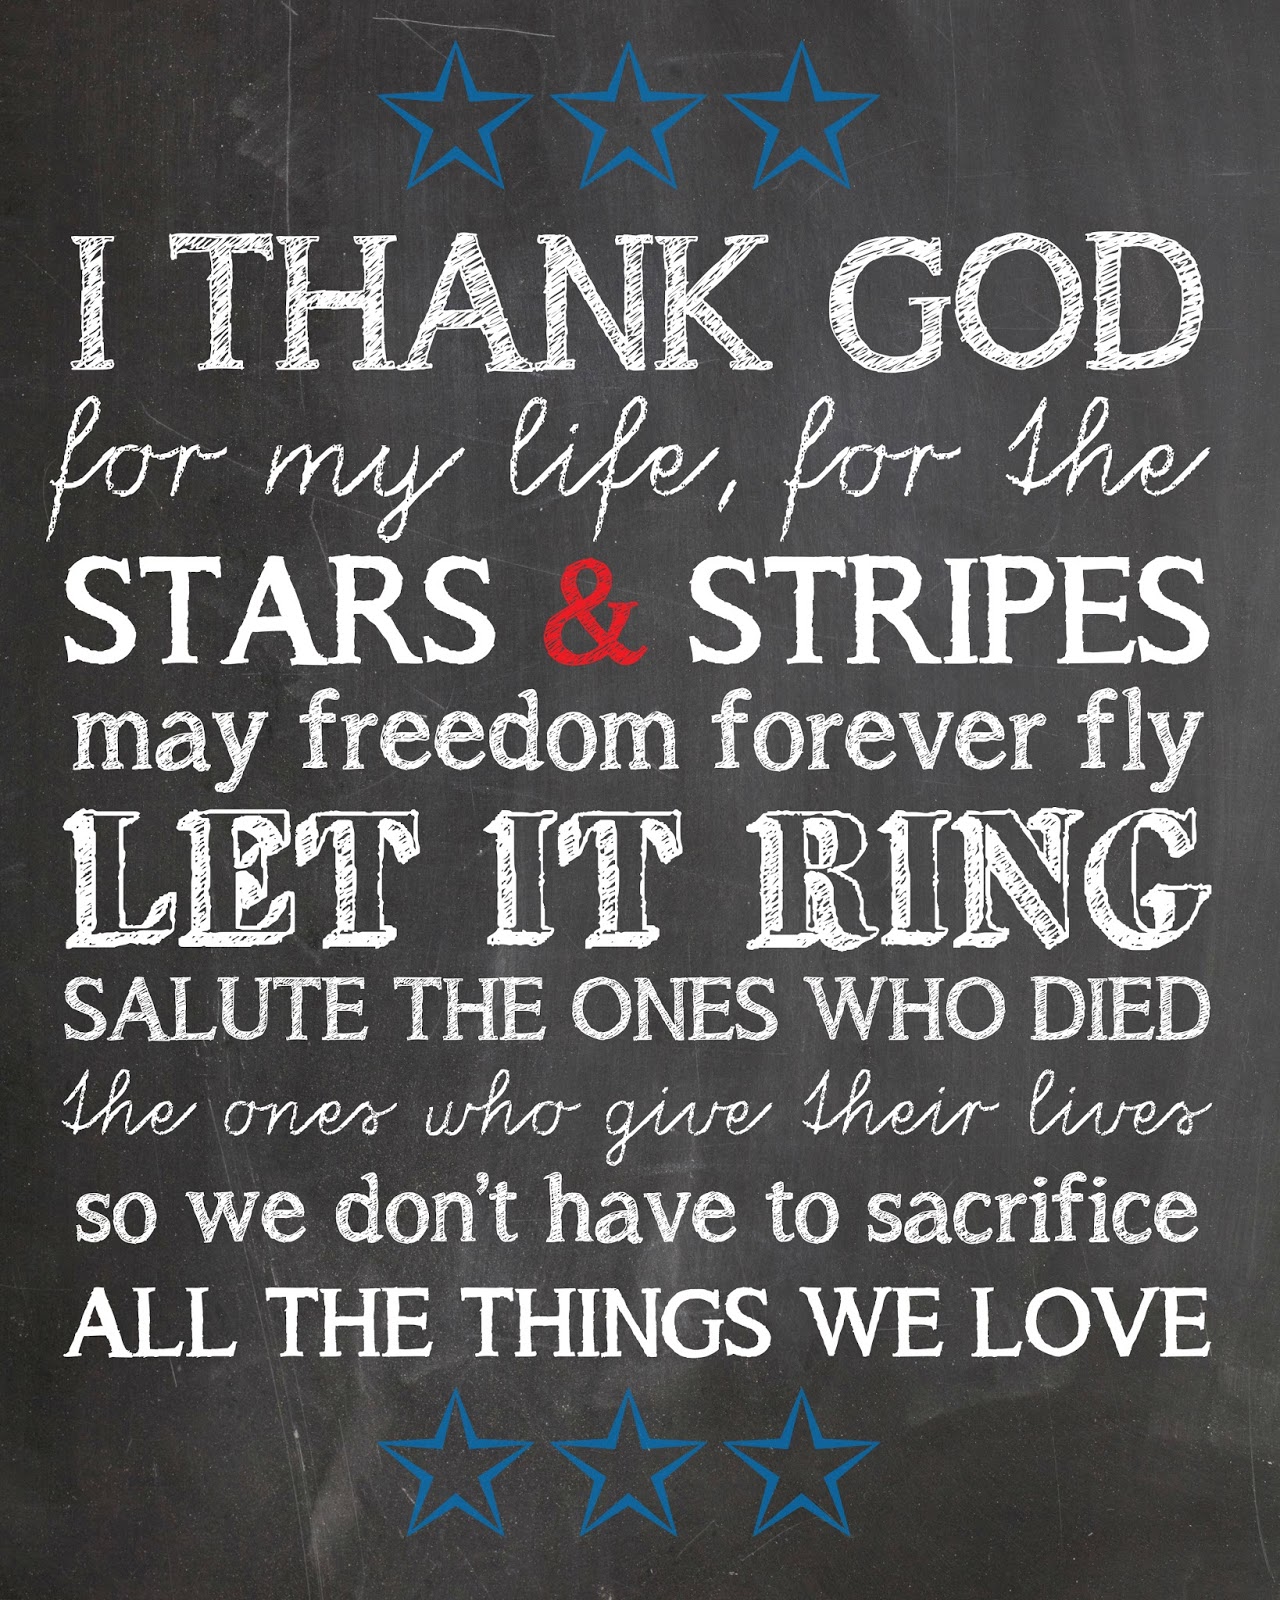 Celebrate 4th of July with These Amazing Quotes!